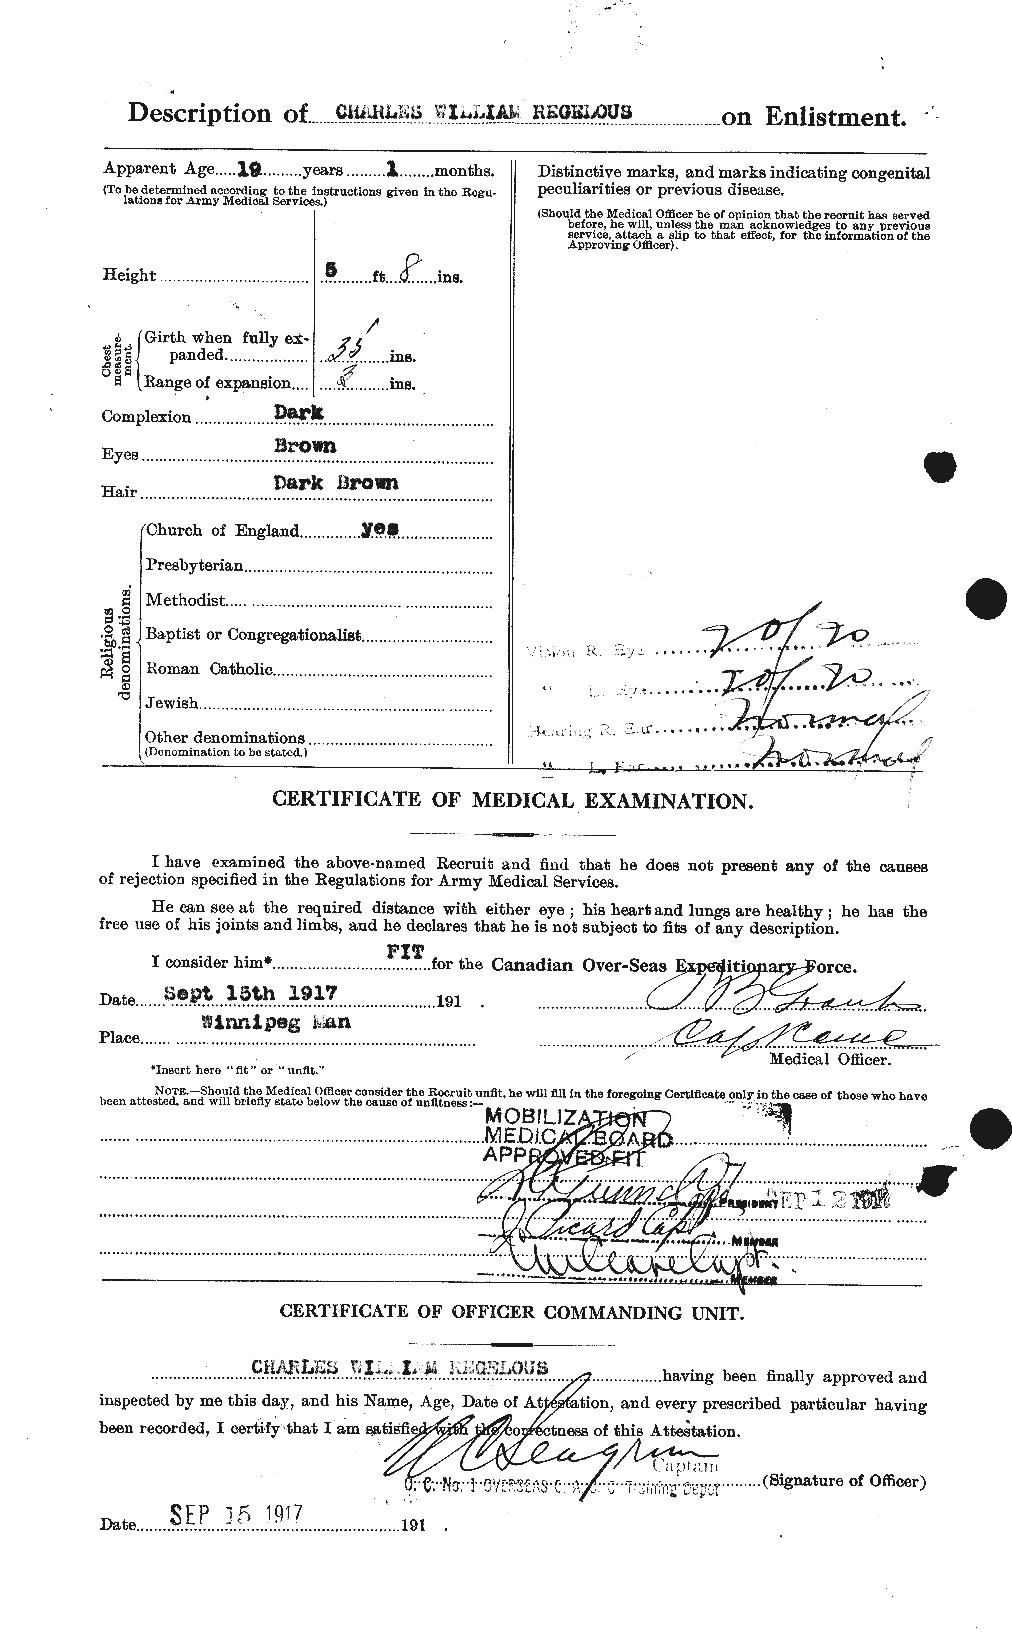 Personnel Records of the First World War - CEF 597633b